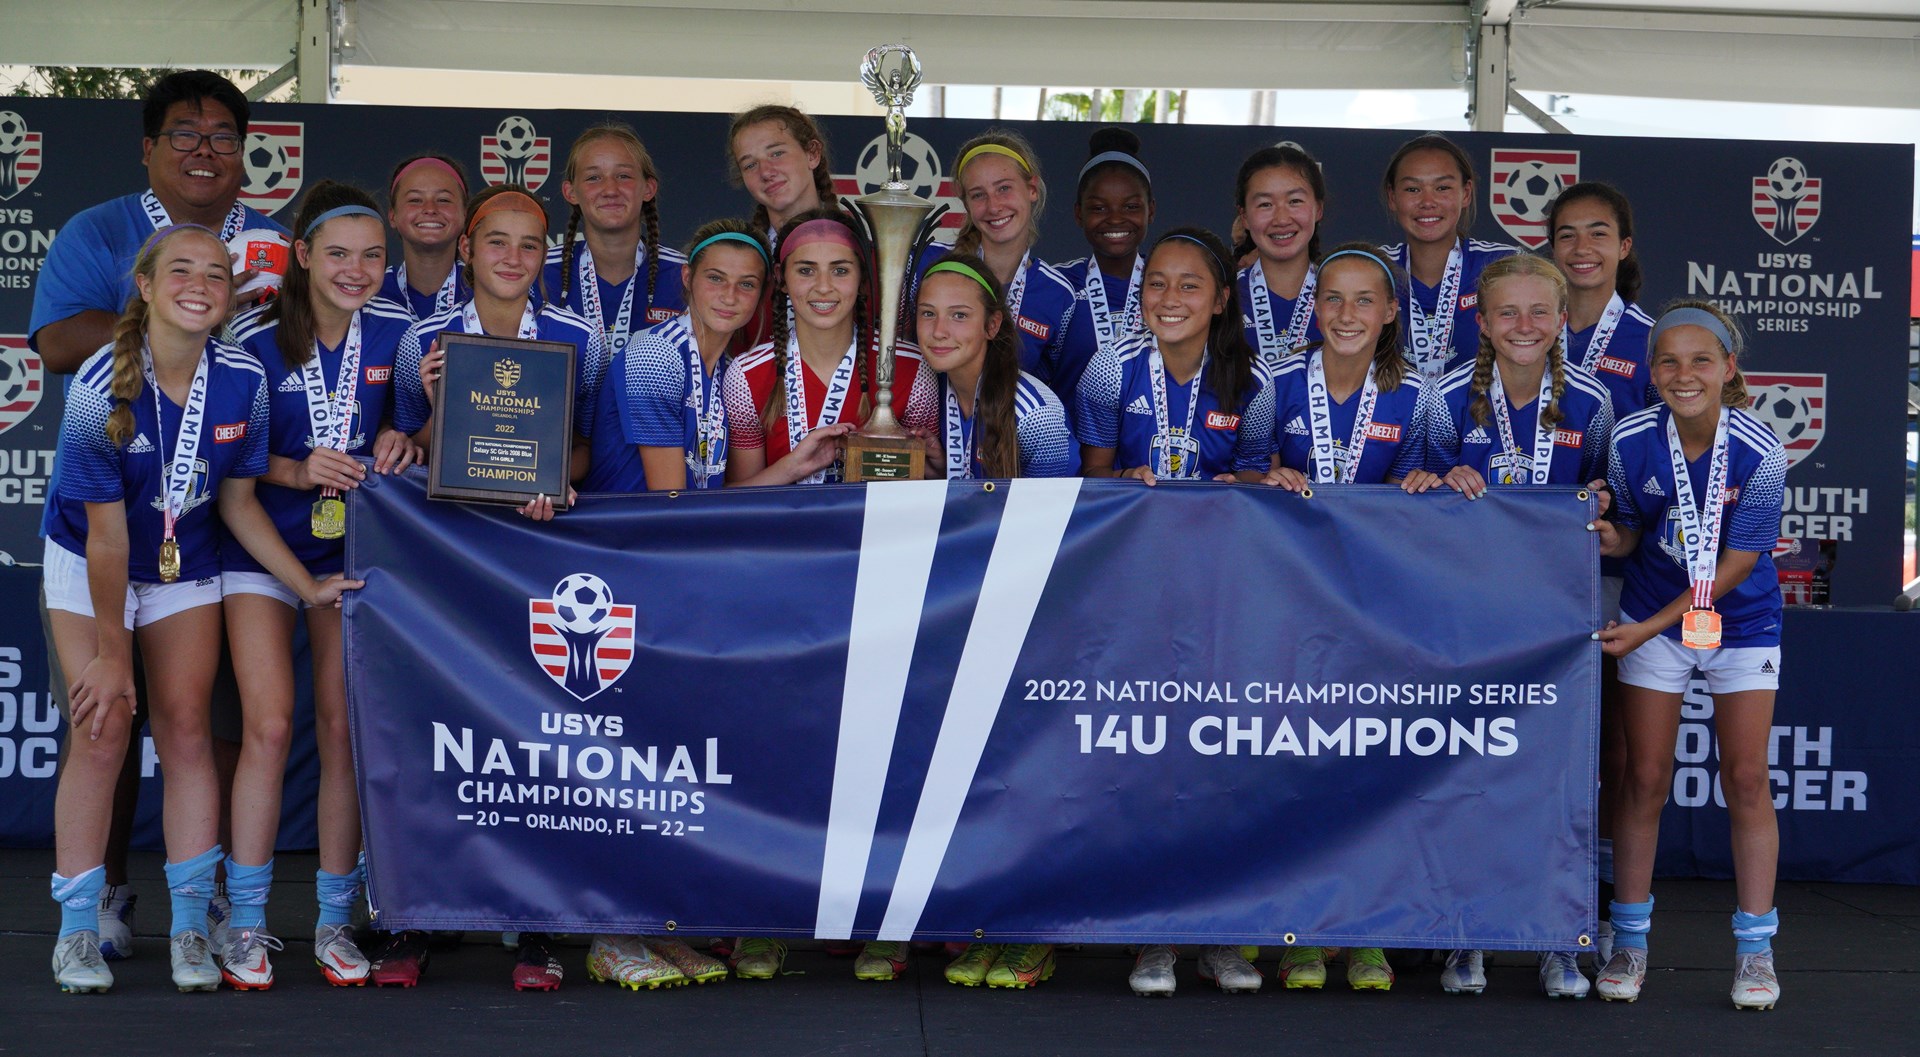 US Youth Soccer National Championships conclude as 14 teams win 2022